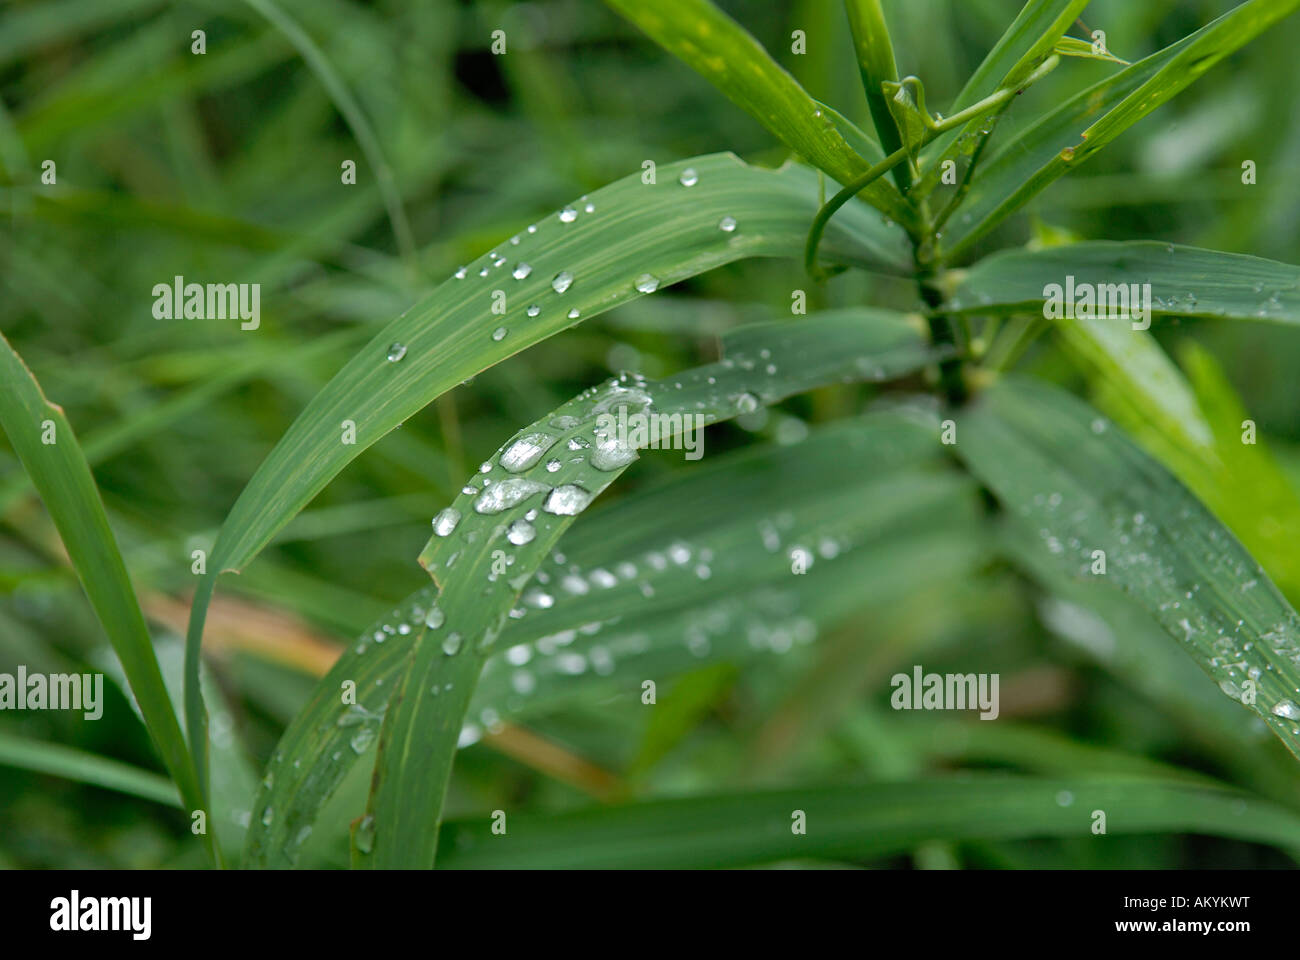 Waterdrops on leaves Stock Photo